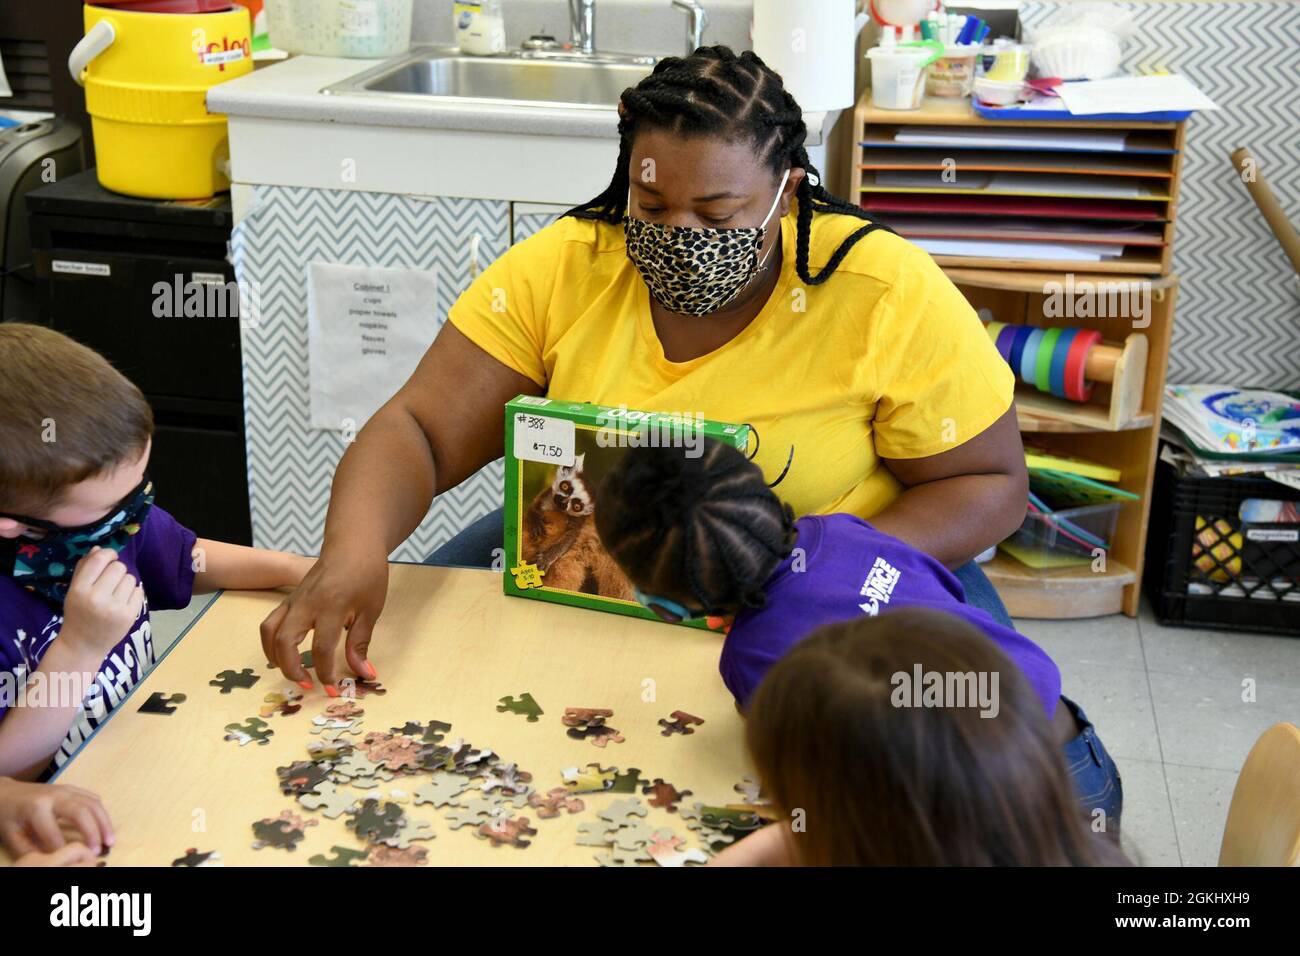 ROBINS AIR FORCE BASE, Ga. – LaKendra Jordan, 78th Force Support Squadron Child Development Center East pre-kindergarten teacher, helps students put a puzzle together during the class’s activity time at Robins Air Force Base, Georgia, April 27, 2021. The CDC and School Age Center provide care to children of military personnel in an enriched environment allowing their parents to focus on the mission needs of the Department of Defense. Stock Photo